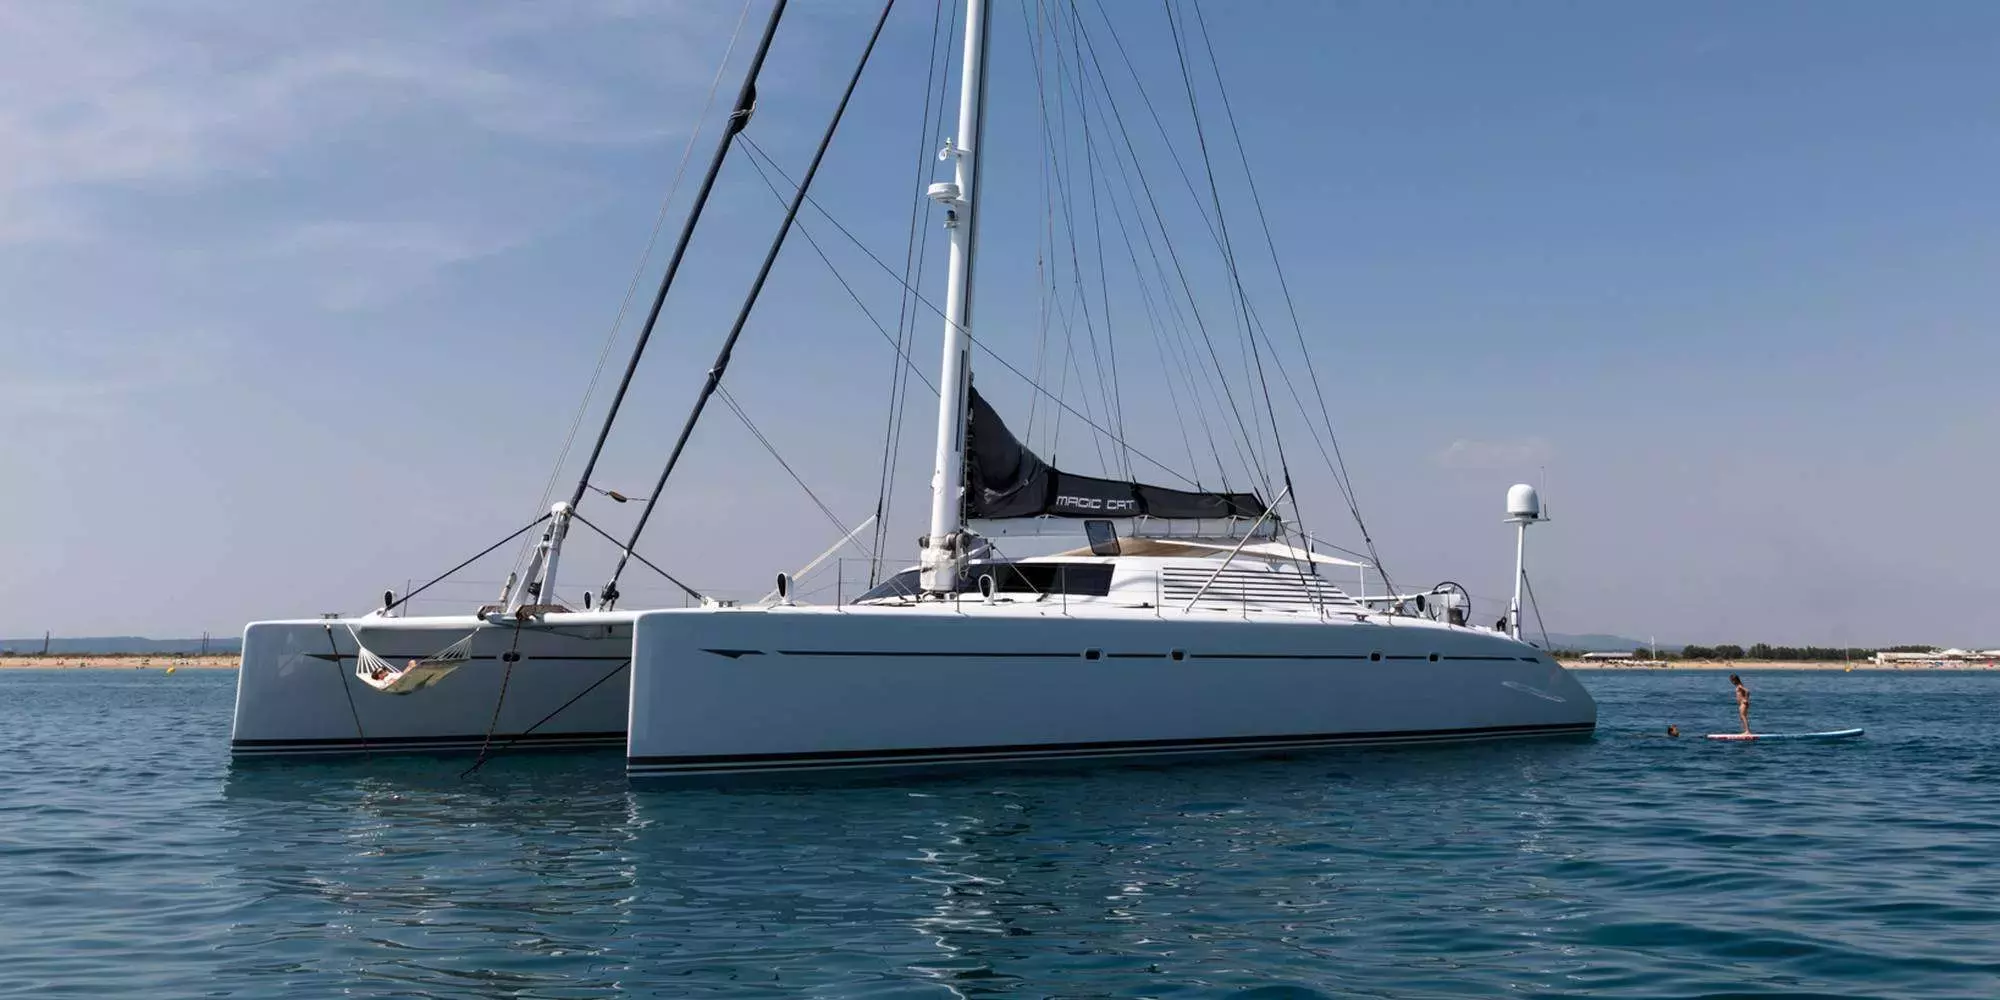 Magic Cat by Multiplast - Top rates for a Charter of a private Luxury Catamaran in Grenadines